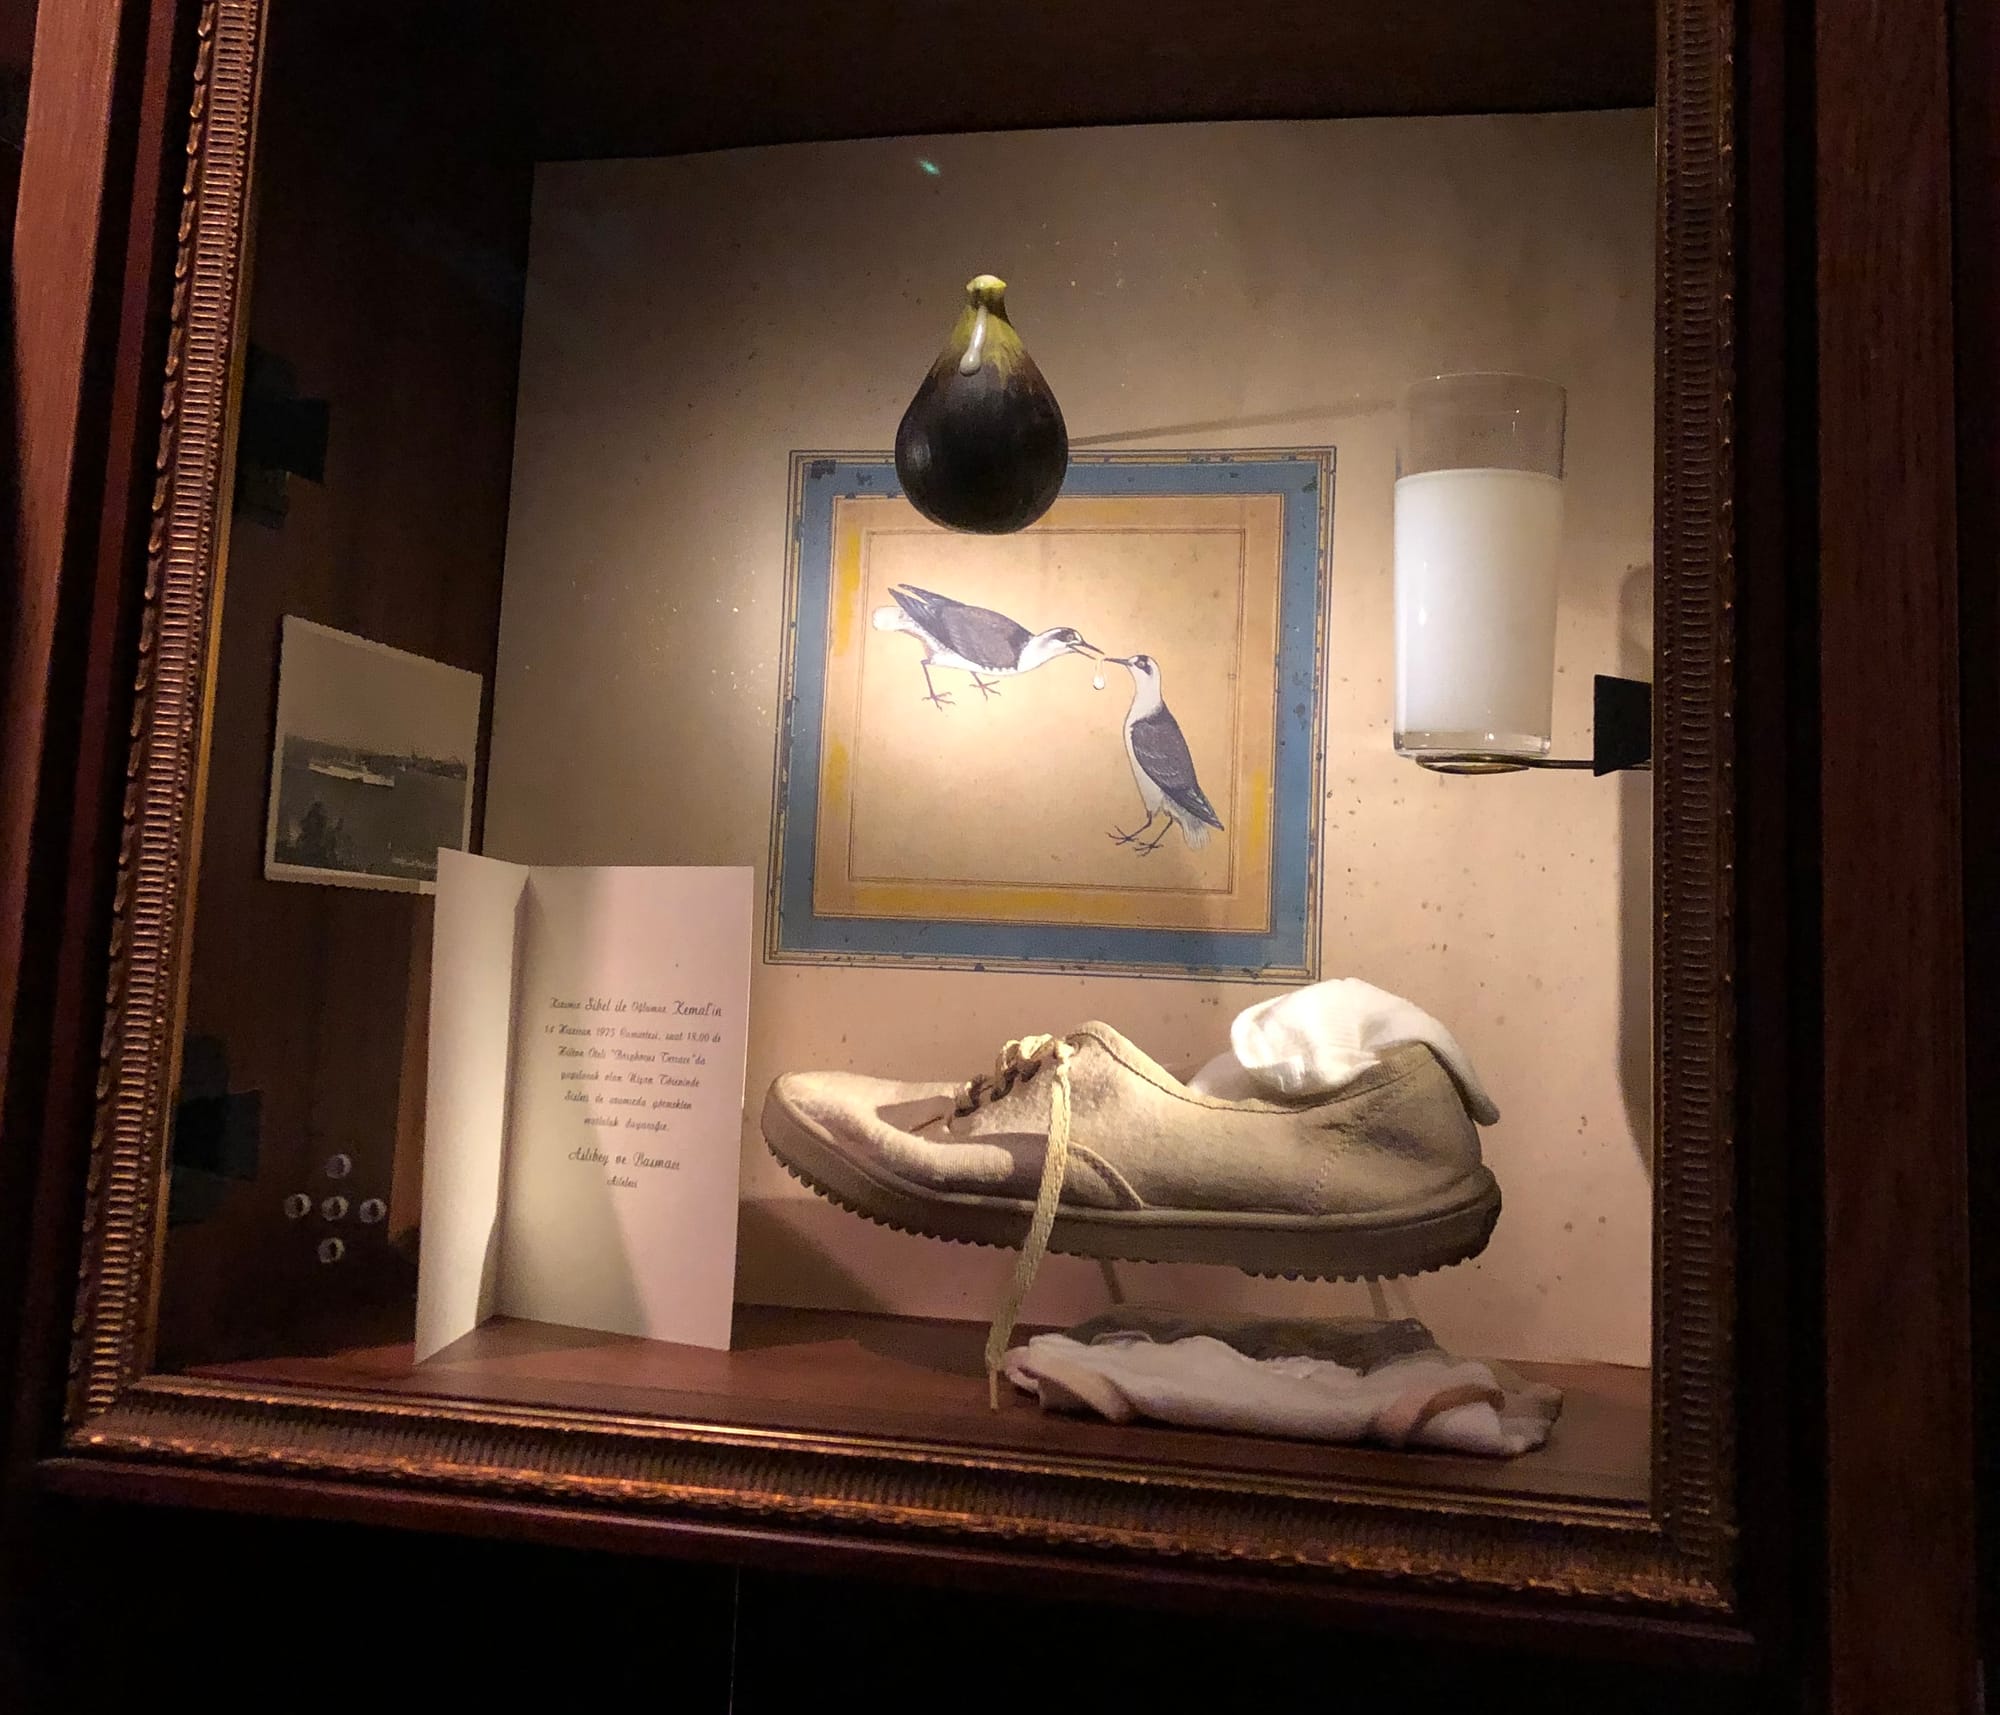 a shadow box holds a single worn white sneaker, a holiday card, glass of cloudy white raki, and a fig hanging from the top. A small illustration of two seagulls hangs in the back.